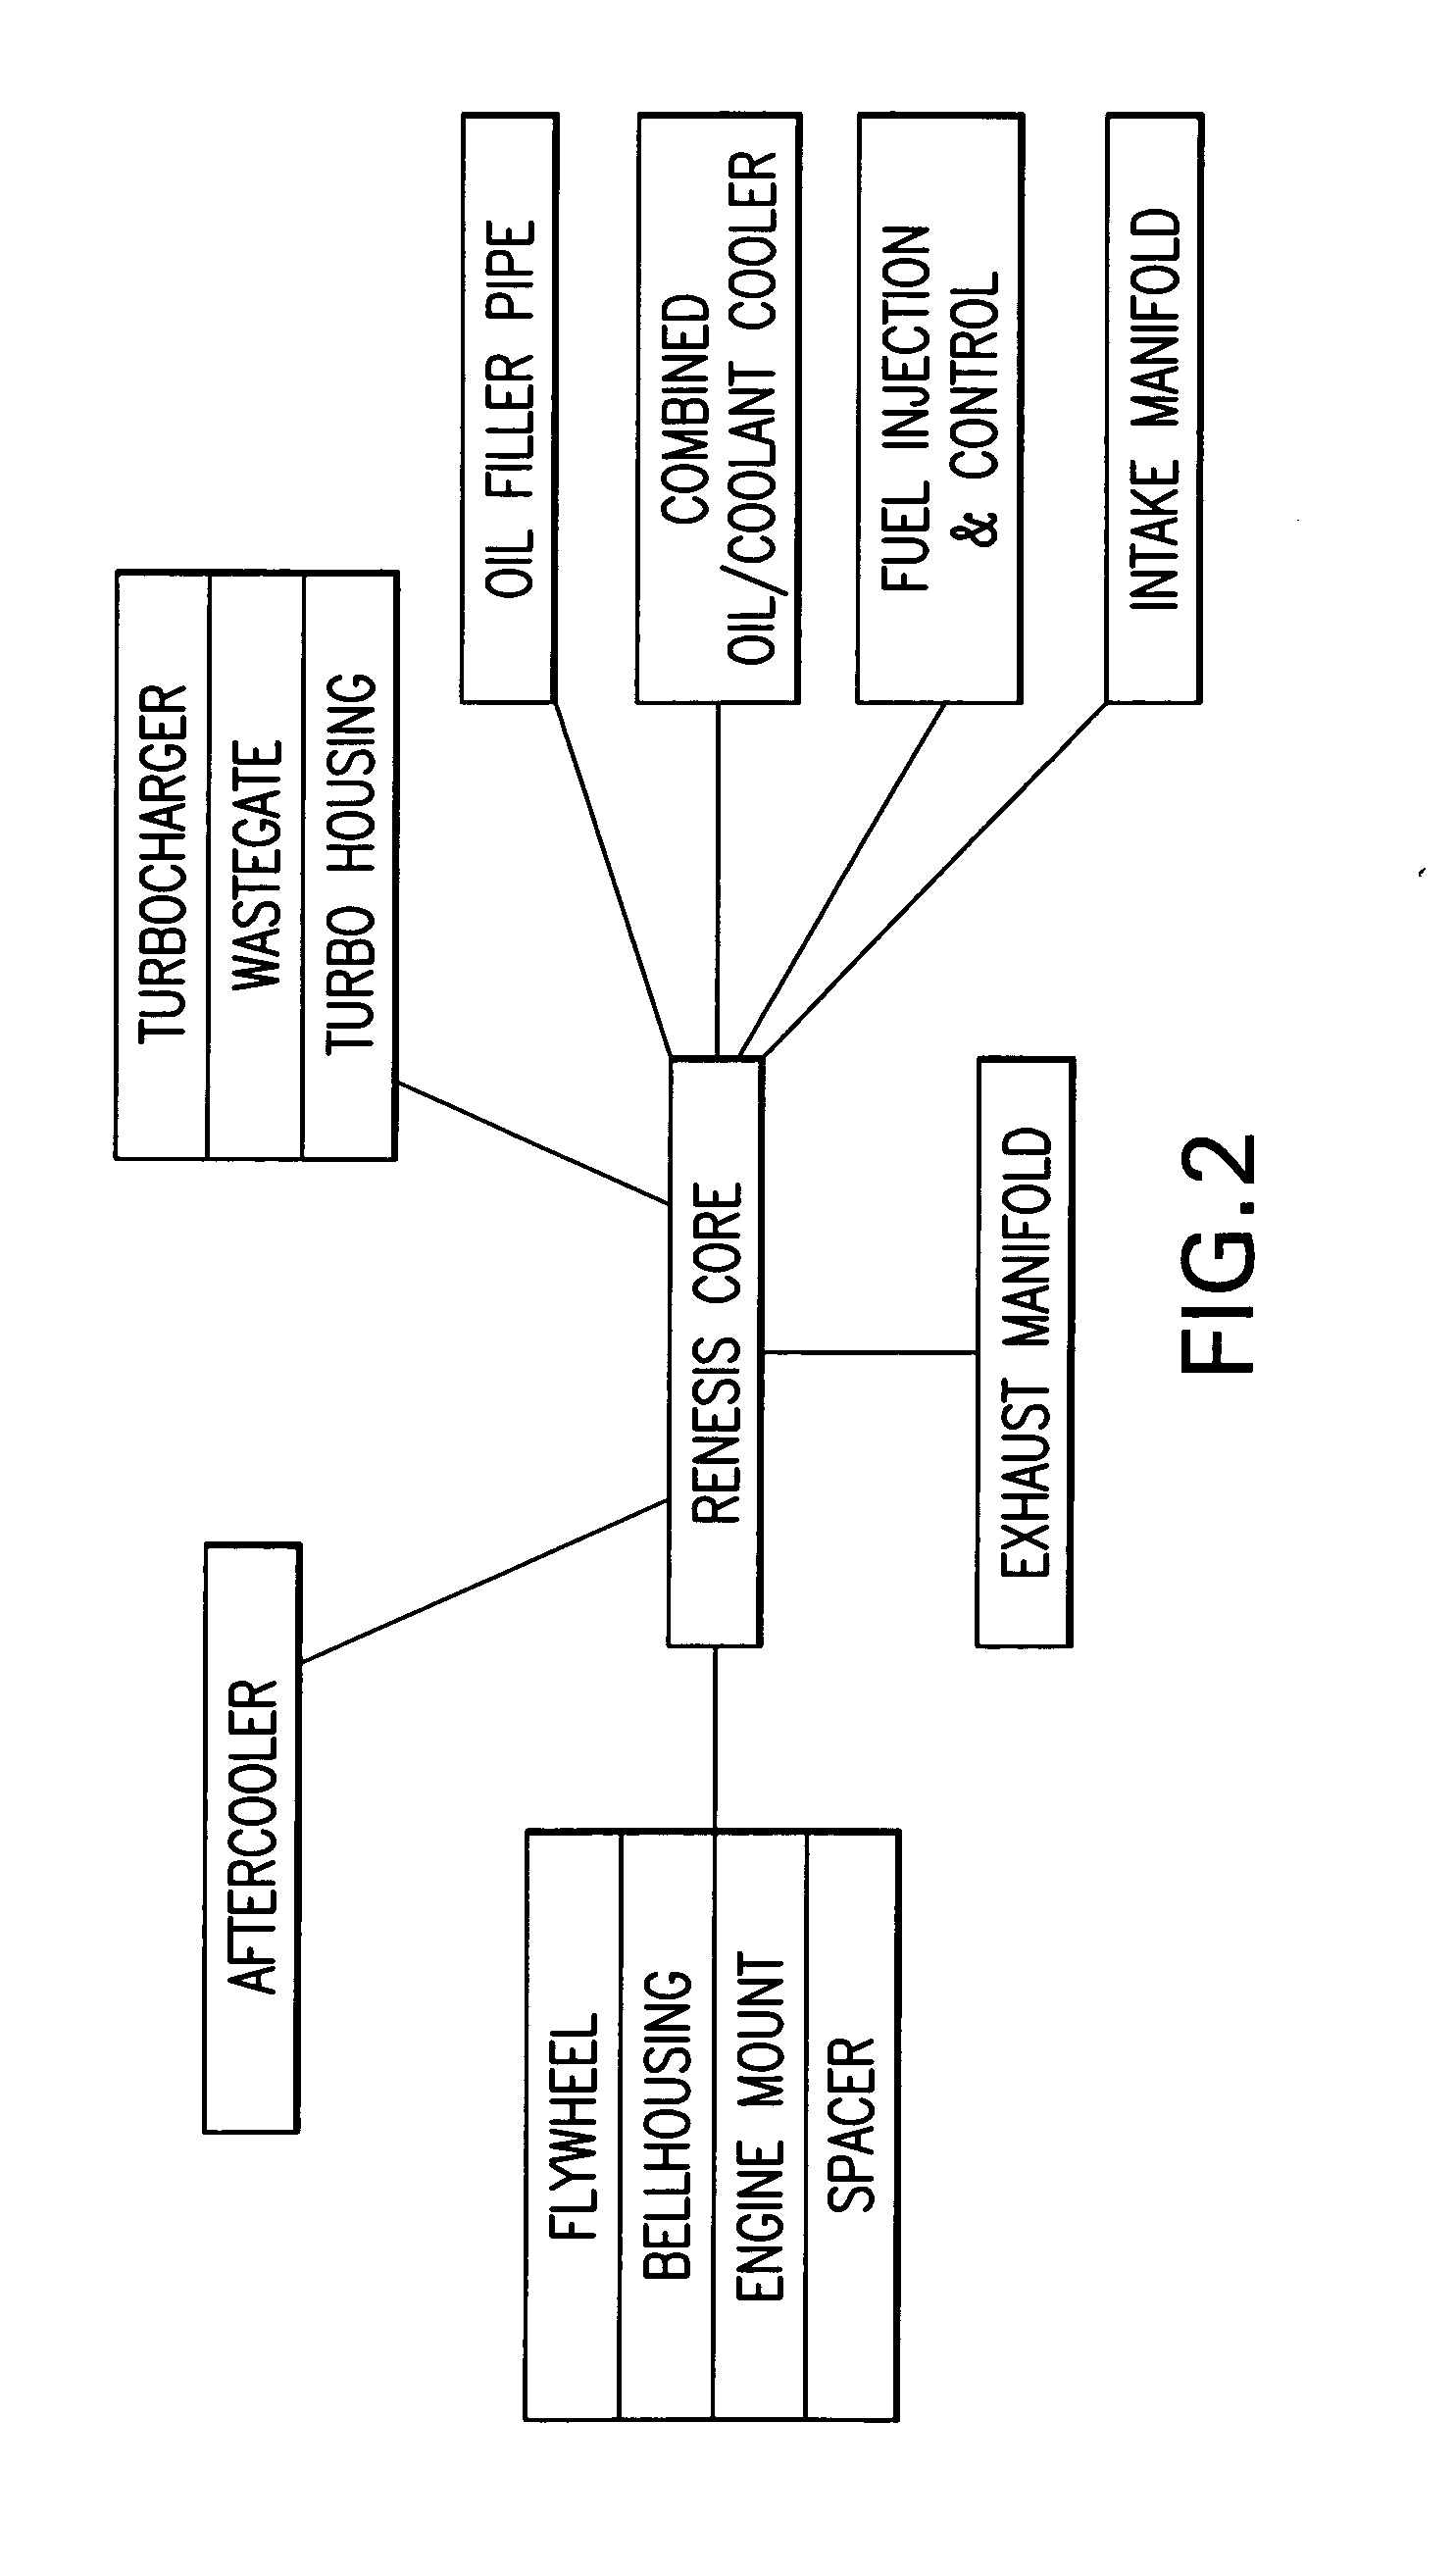 System and method for customizing a rotary engine for marine vessel propulsion